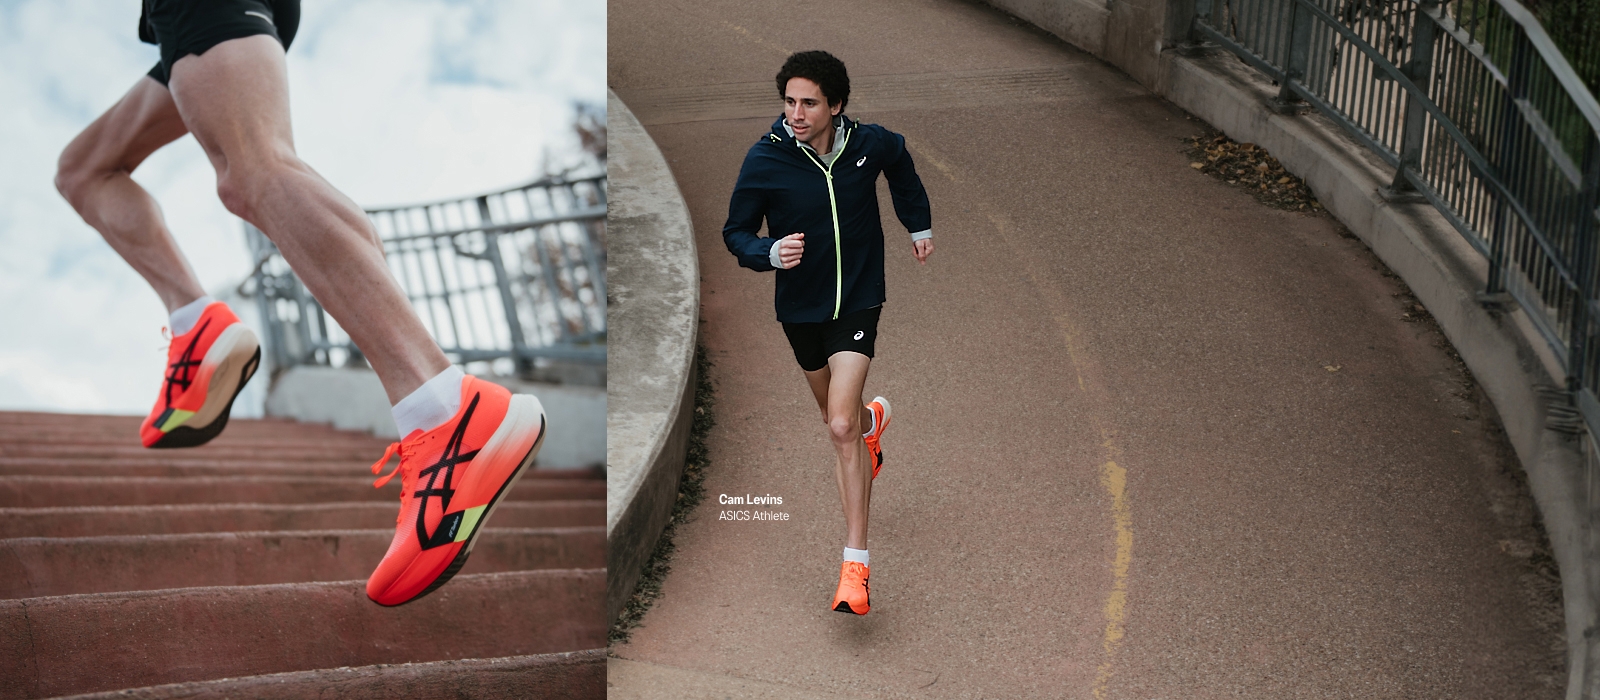 New Spring Running Collection is here - Craft Sportswear US